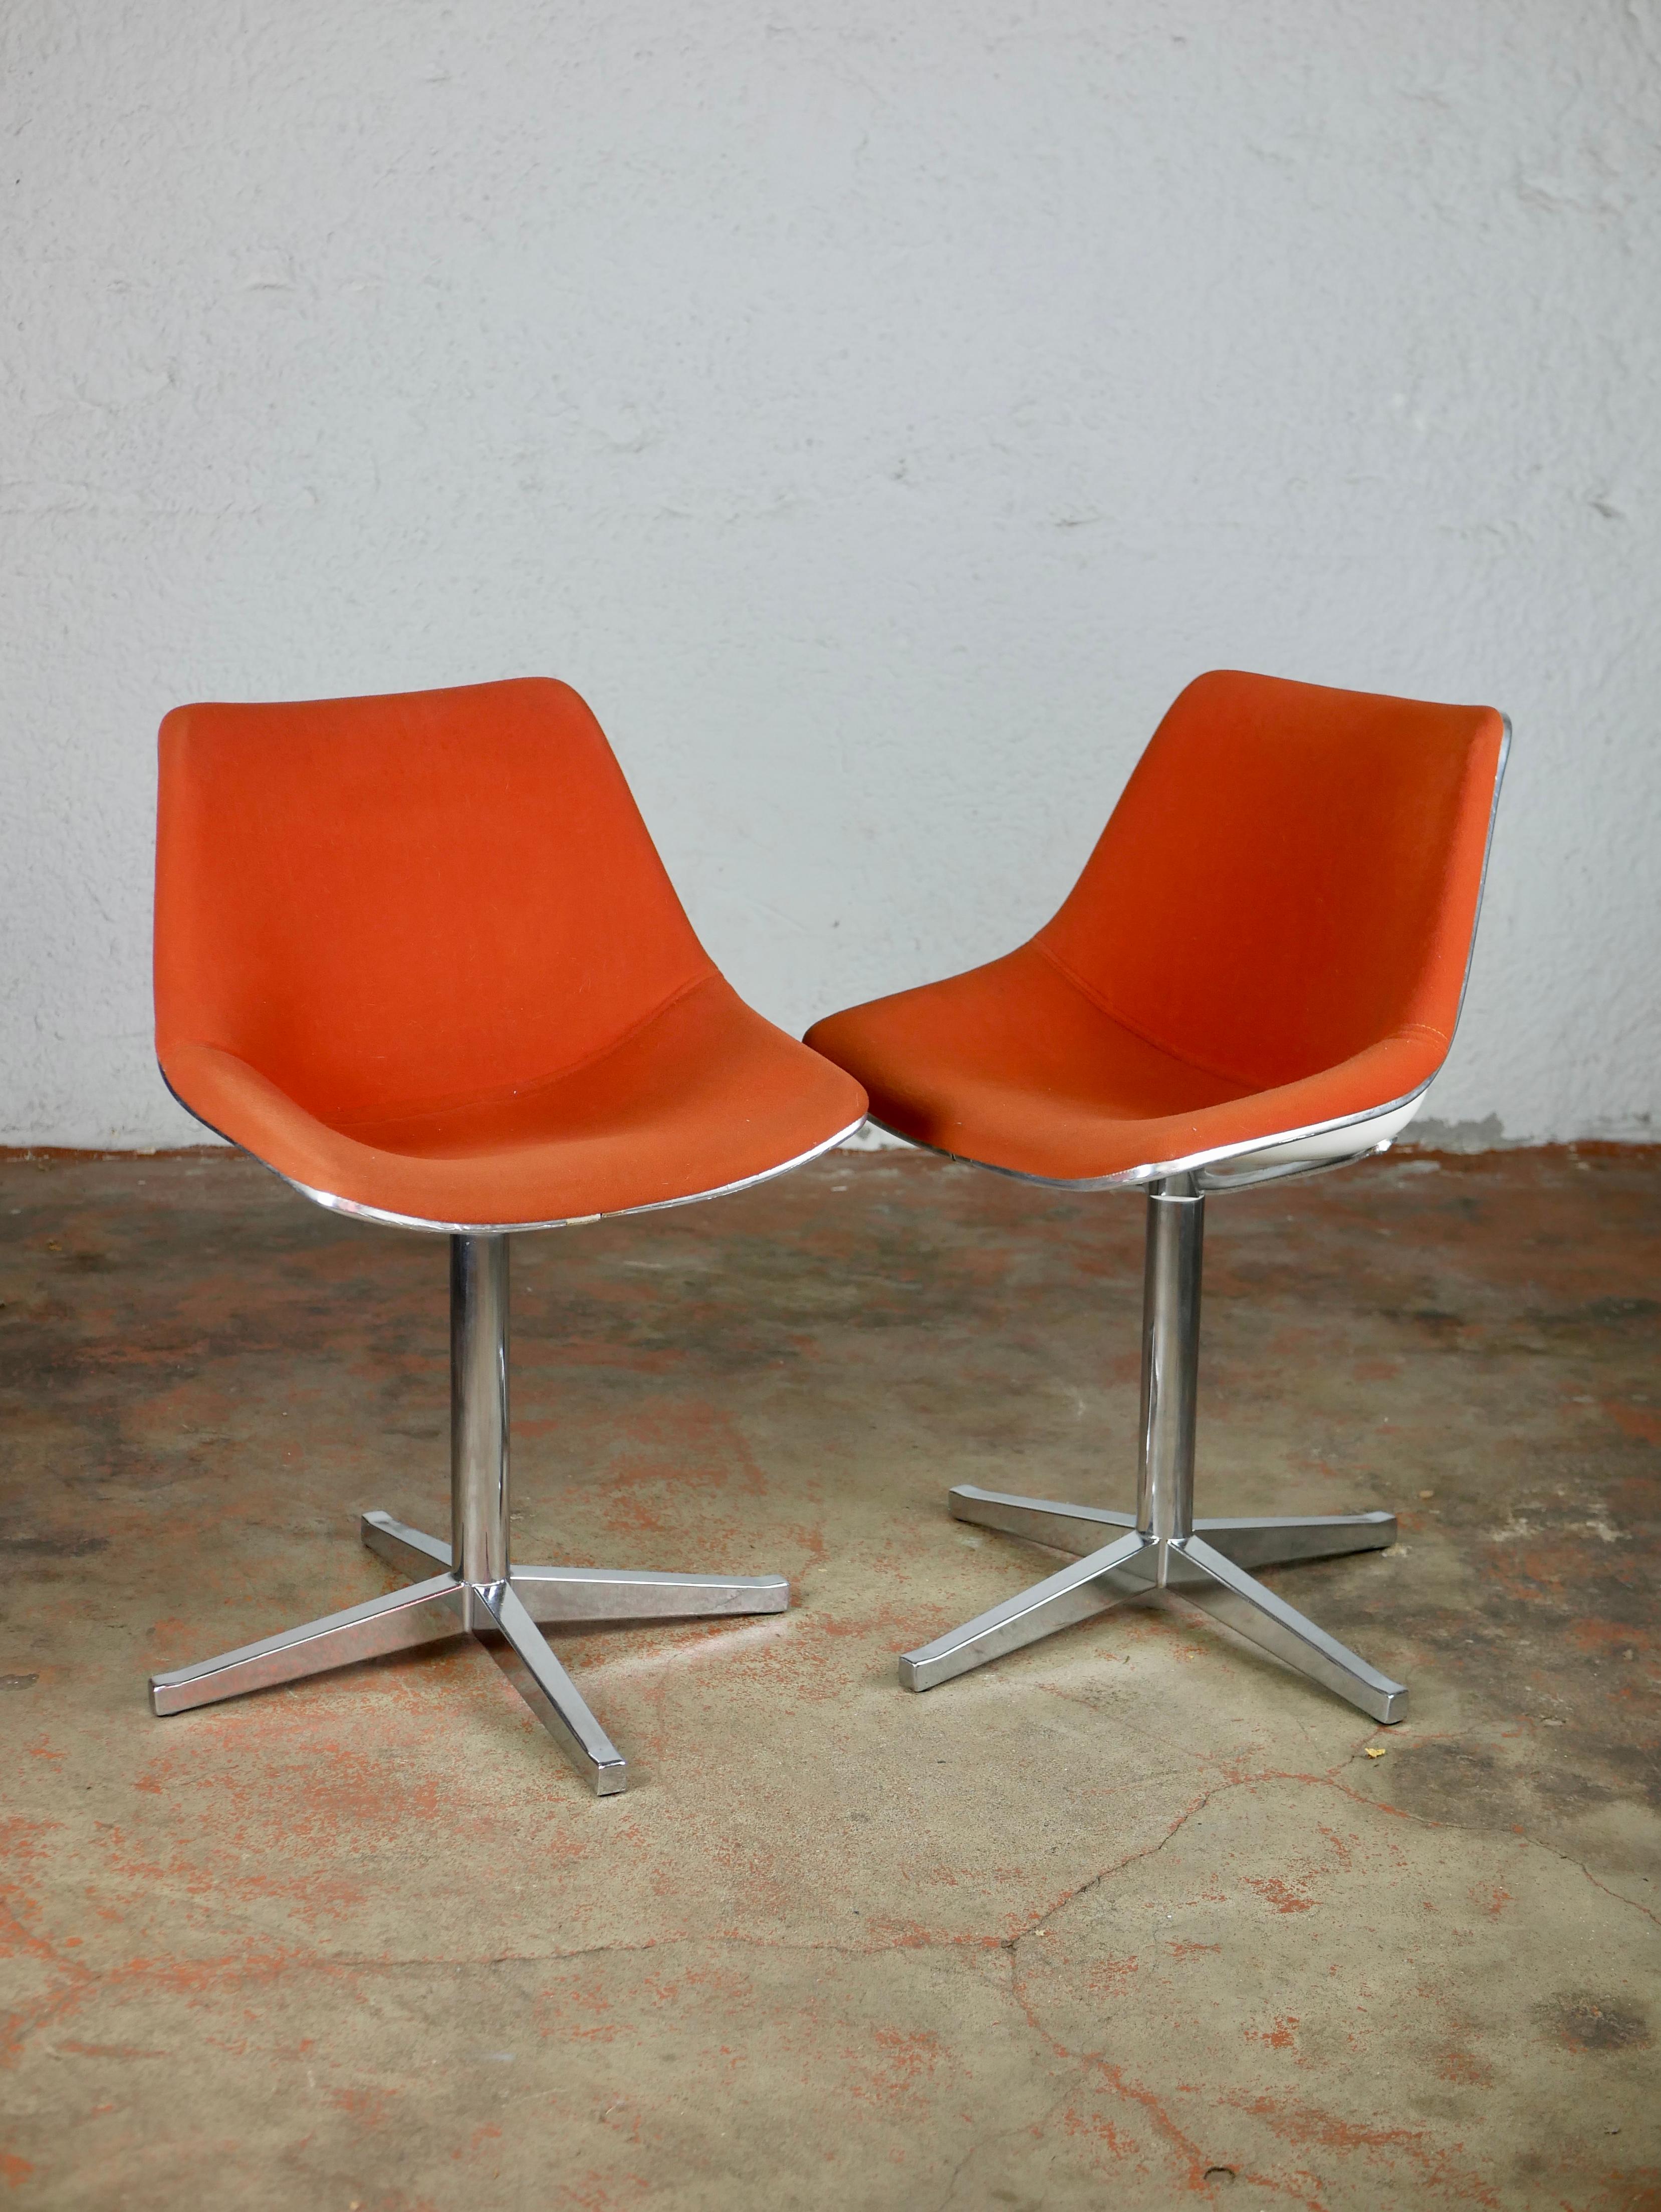 Vitamine is key ! 
You will have it surely with this two adorable chairs, model L202 designed by the great French architect and urbanist Roland Schweitzer, student of Auguste Perret and Jean Prouvé, for Lafargue in the 1970s.
White molded plastic